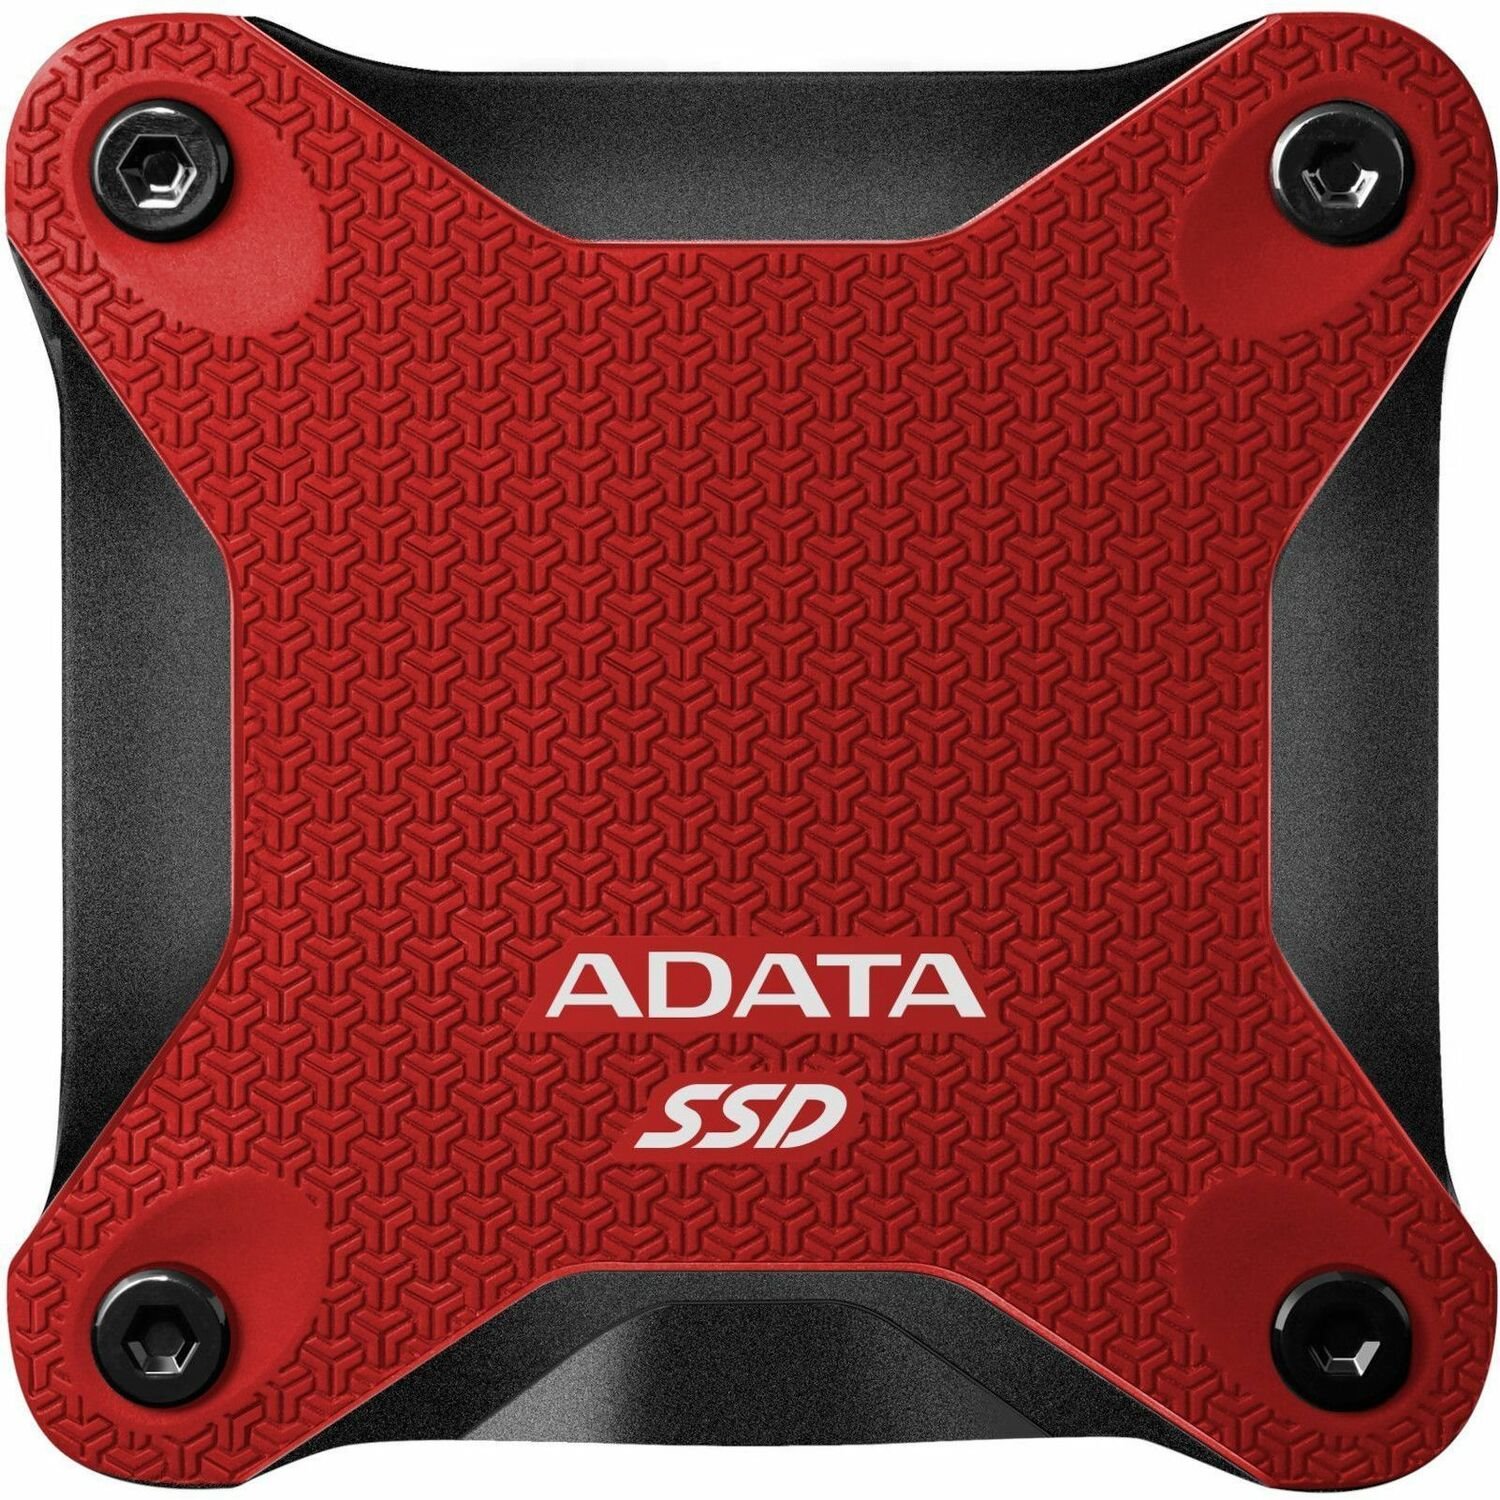 Adata SD620 512 GB Solid State Drive - External - Red